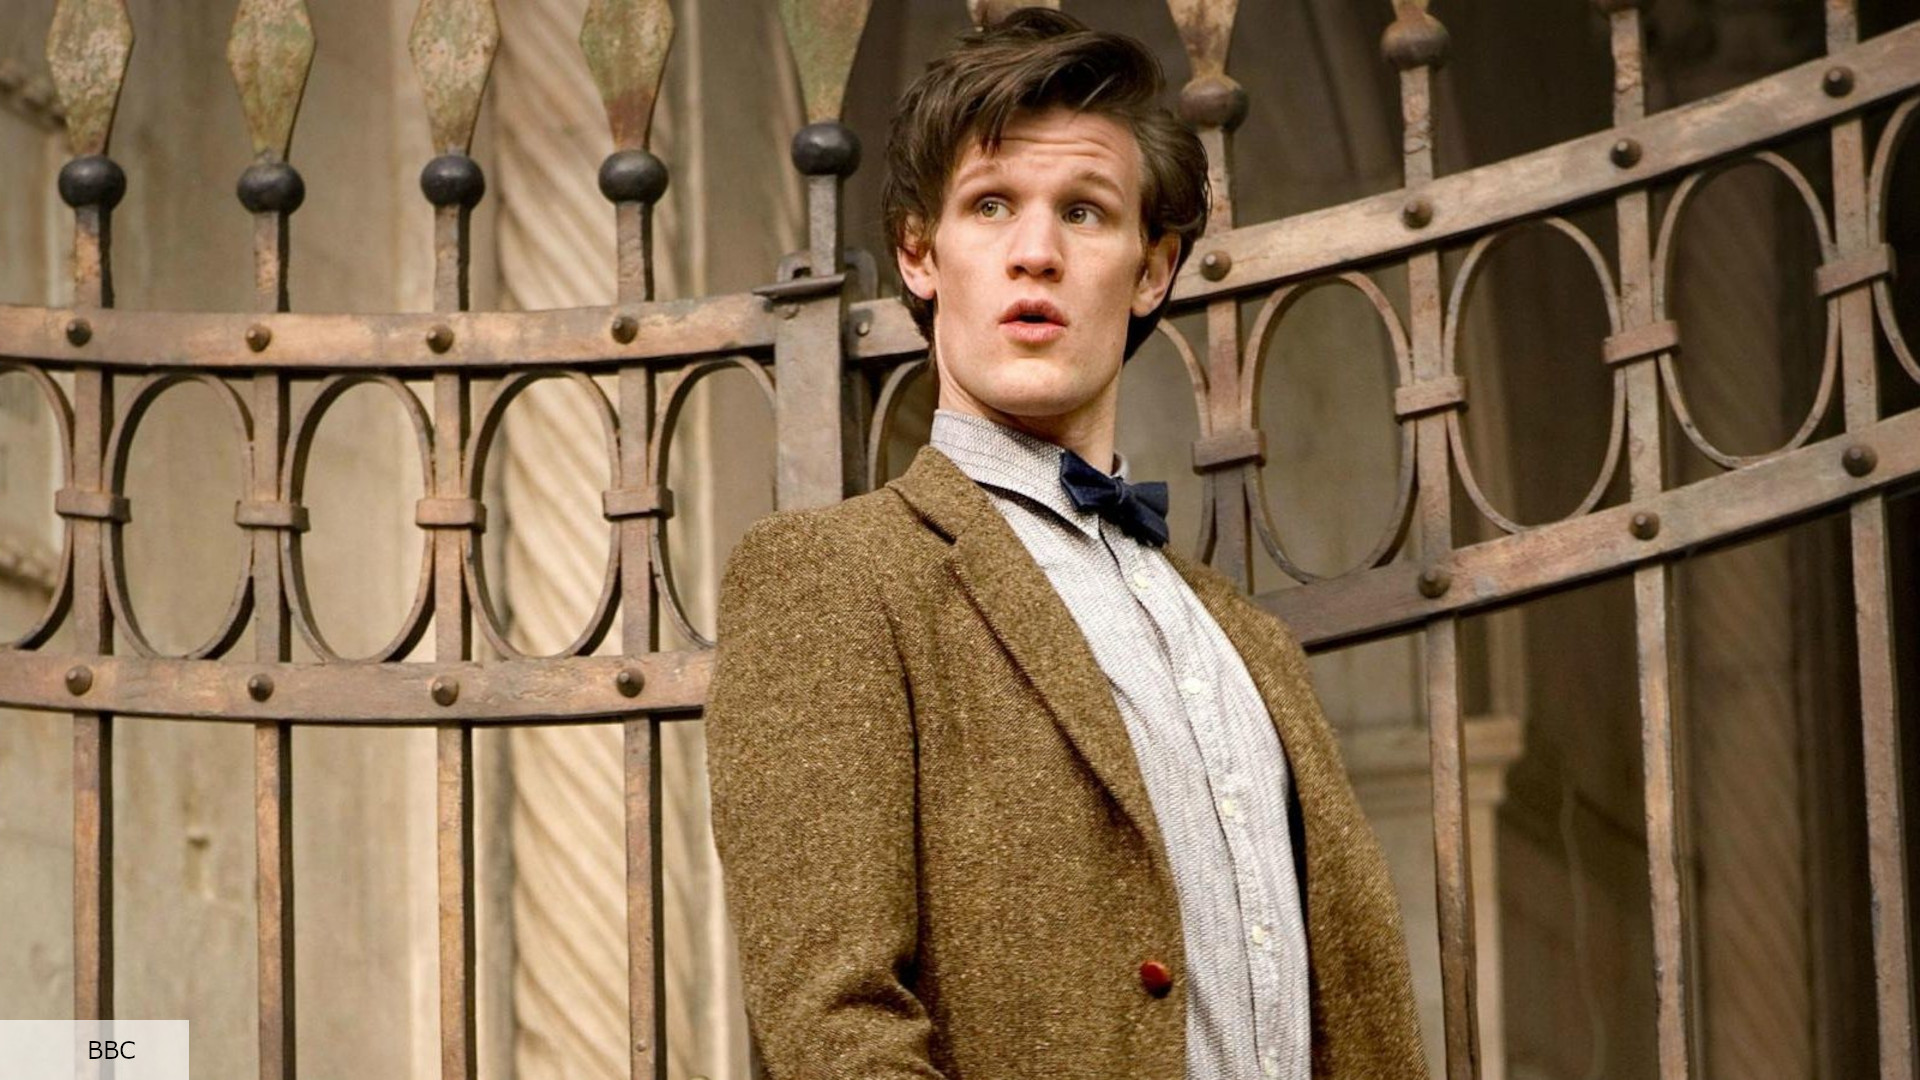 Matt Smith says his Star Wars role represented a big shift for the series.